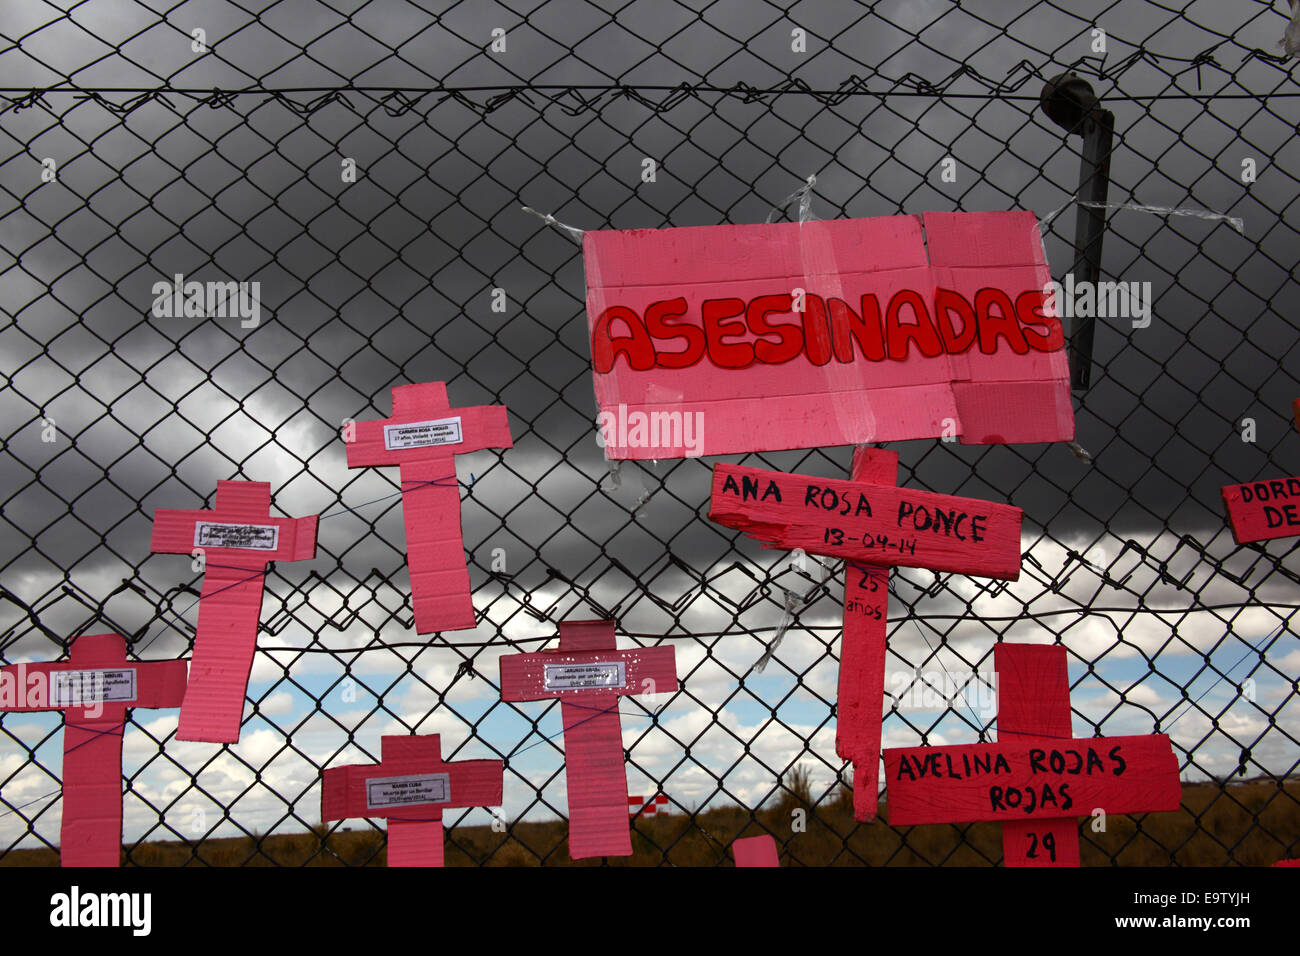 EL ALTO, BOLIVIA, 2nd November 2014. Crosses with the names of women against dark skies on a wire mesh fence, part of a memorial for recent victims of femicide and domestic violence against women. According to a WHO report in January 2013 Bolivia is the country with the highest rate of violence against women in Latin America. Credit:  James Brunker / Alamy Live News Stock Photo